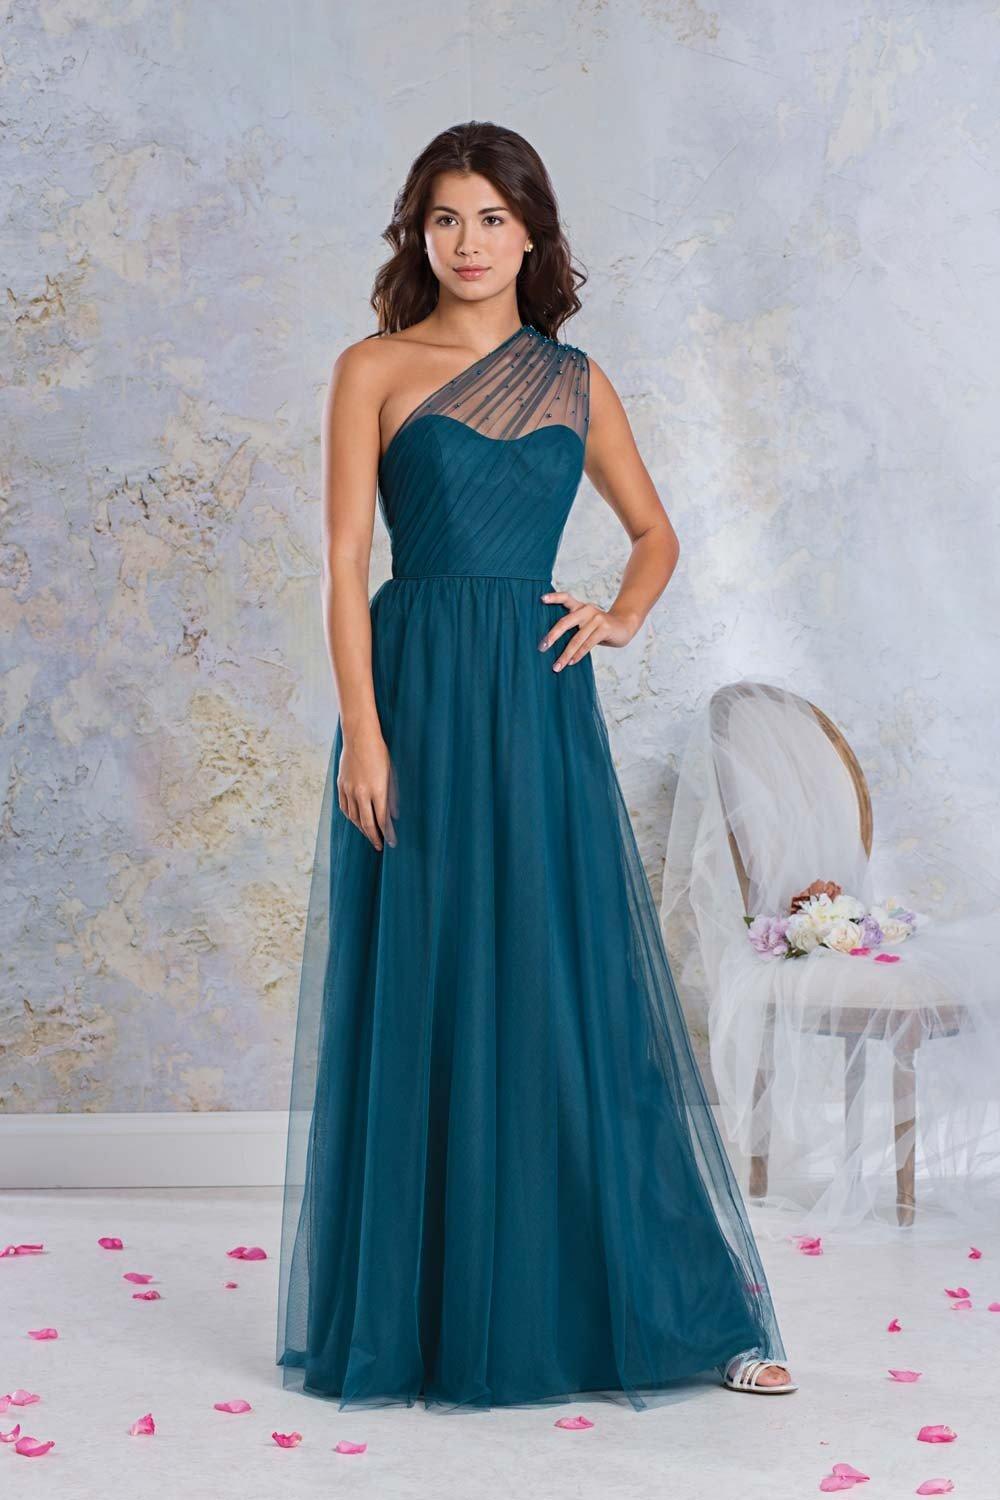 Teal Bridesmaid Dresses: 15 of Our ...